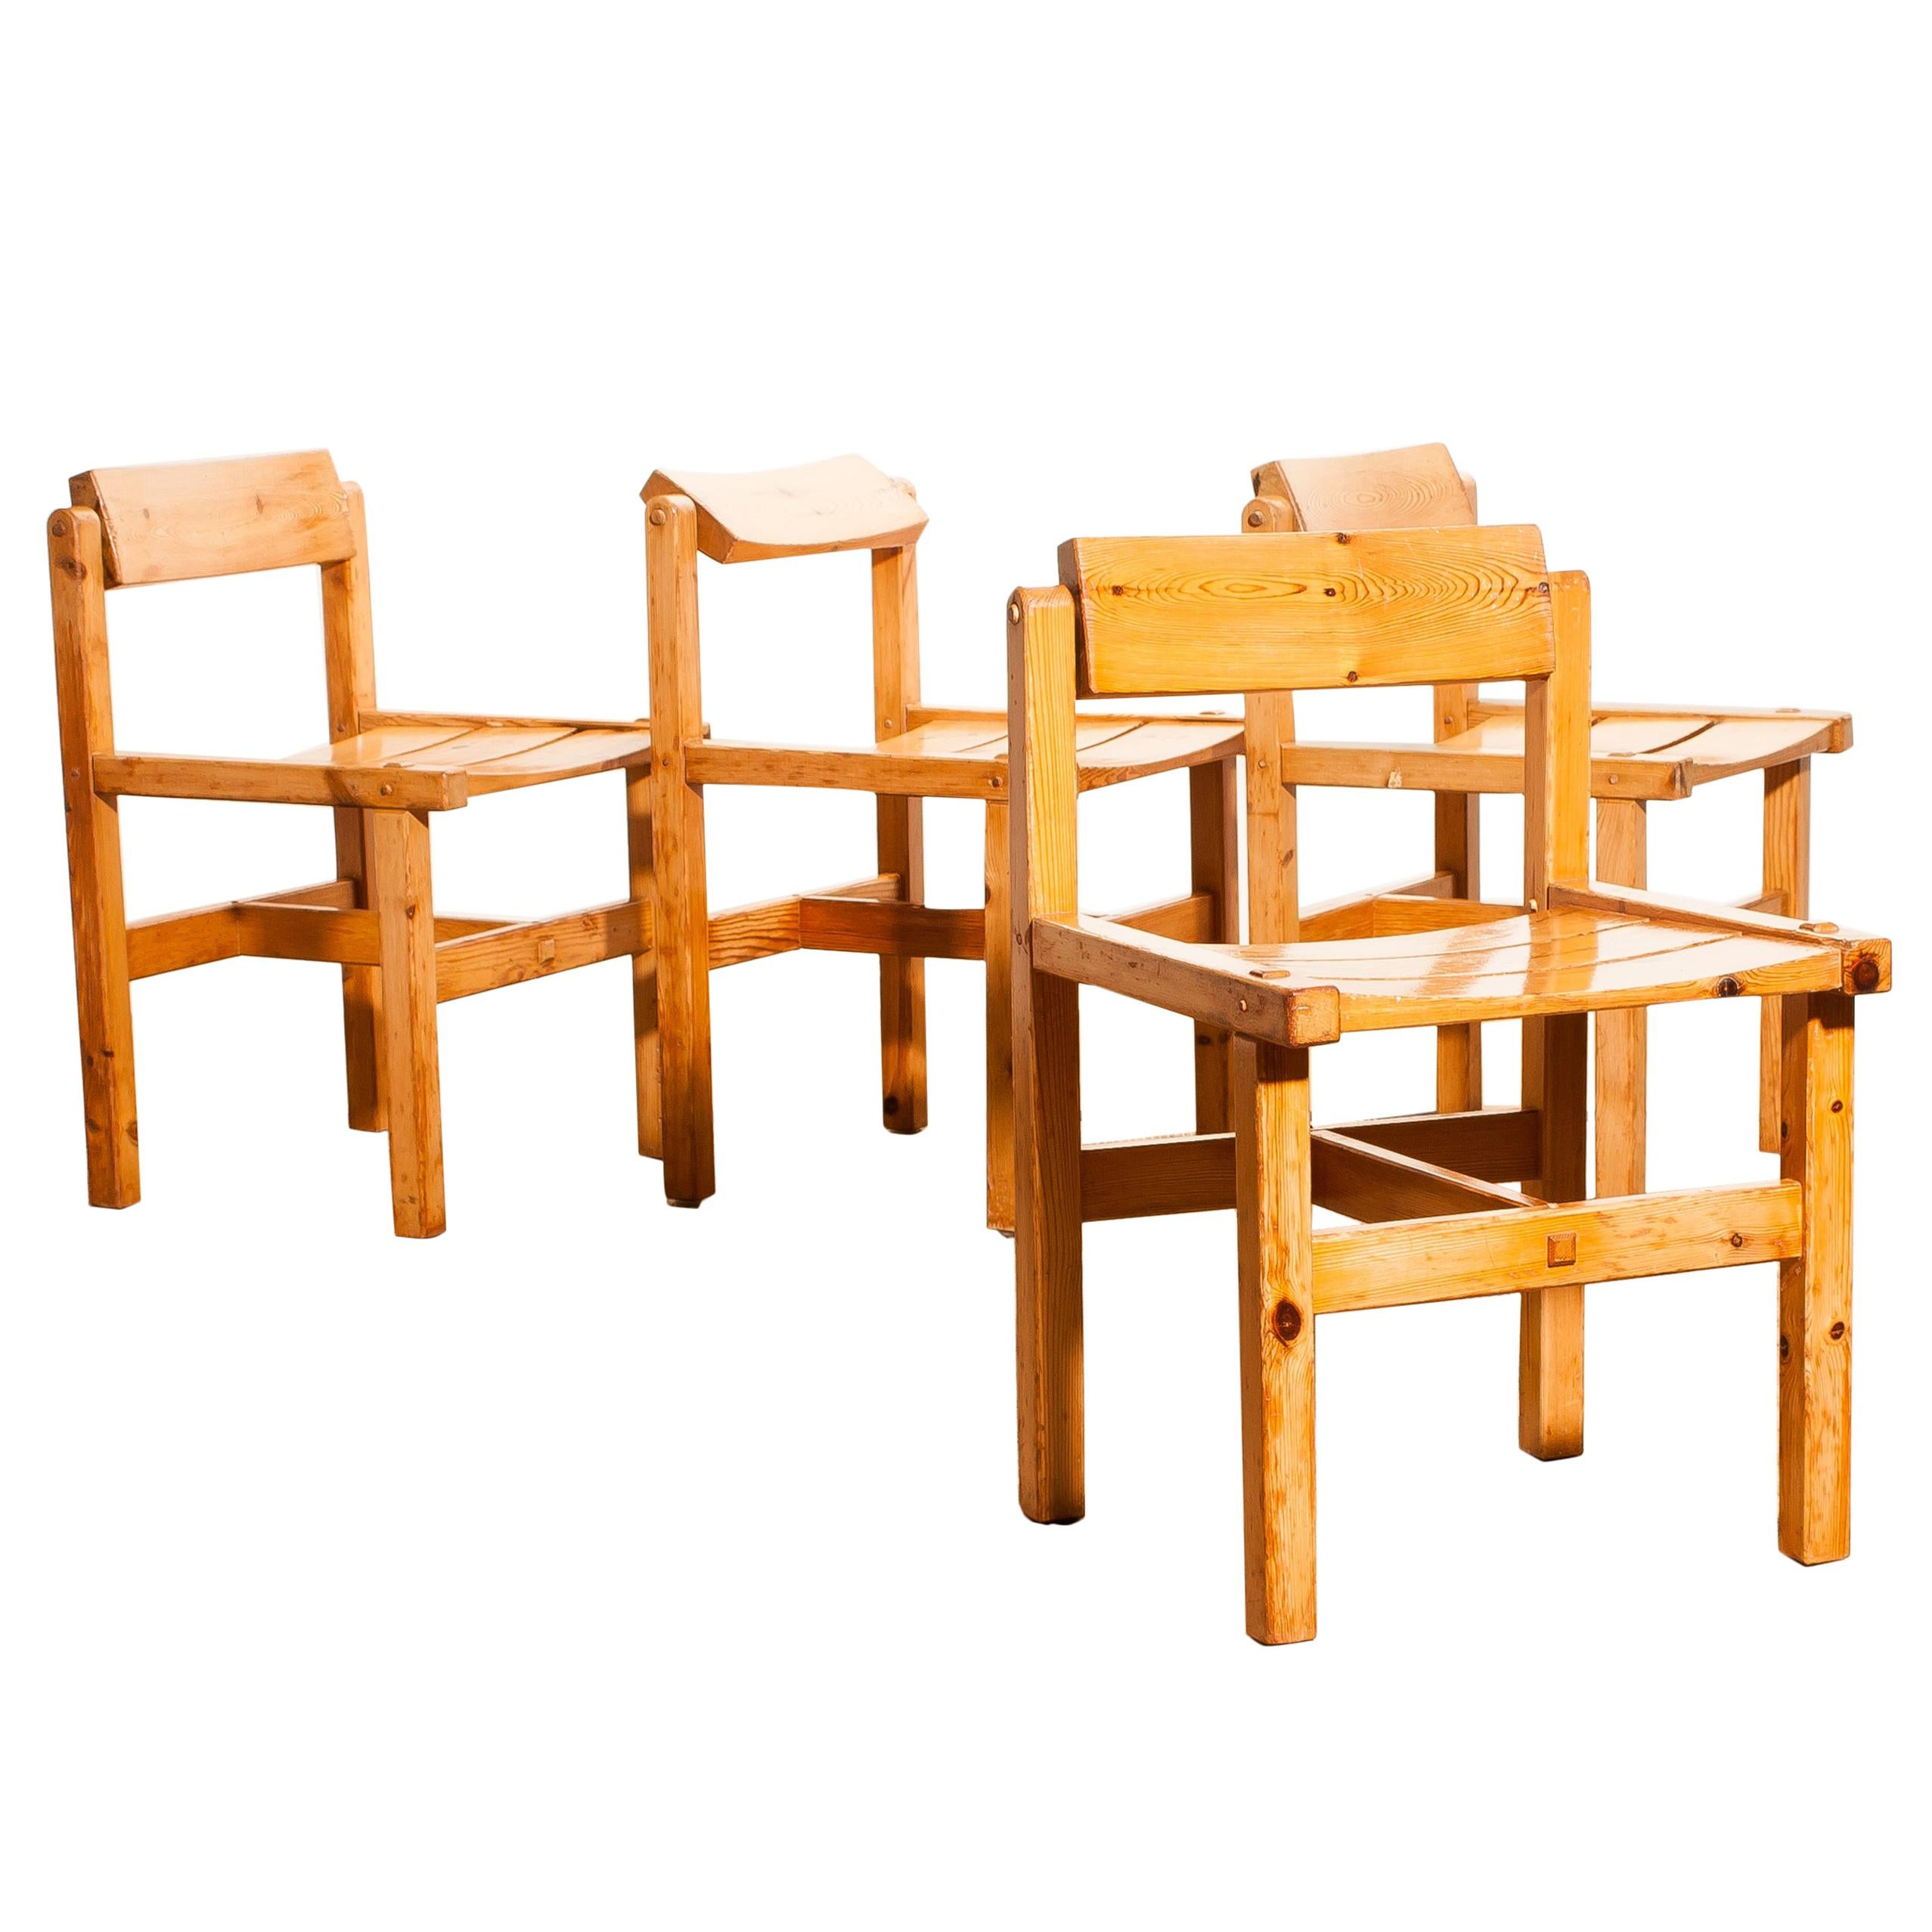 1960s, Set of Four Pine Dining Chairs by Edvin Helseth, Norway